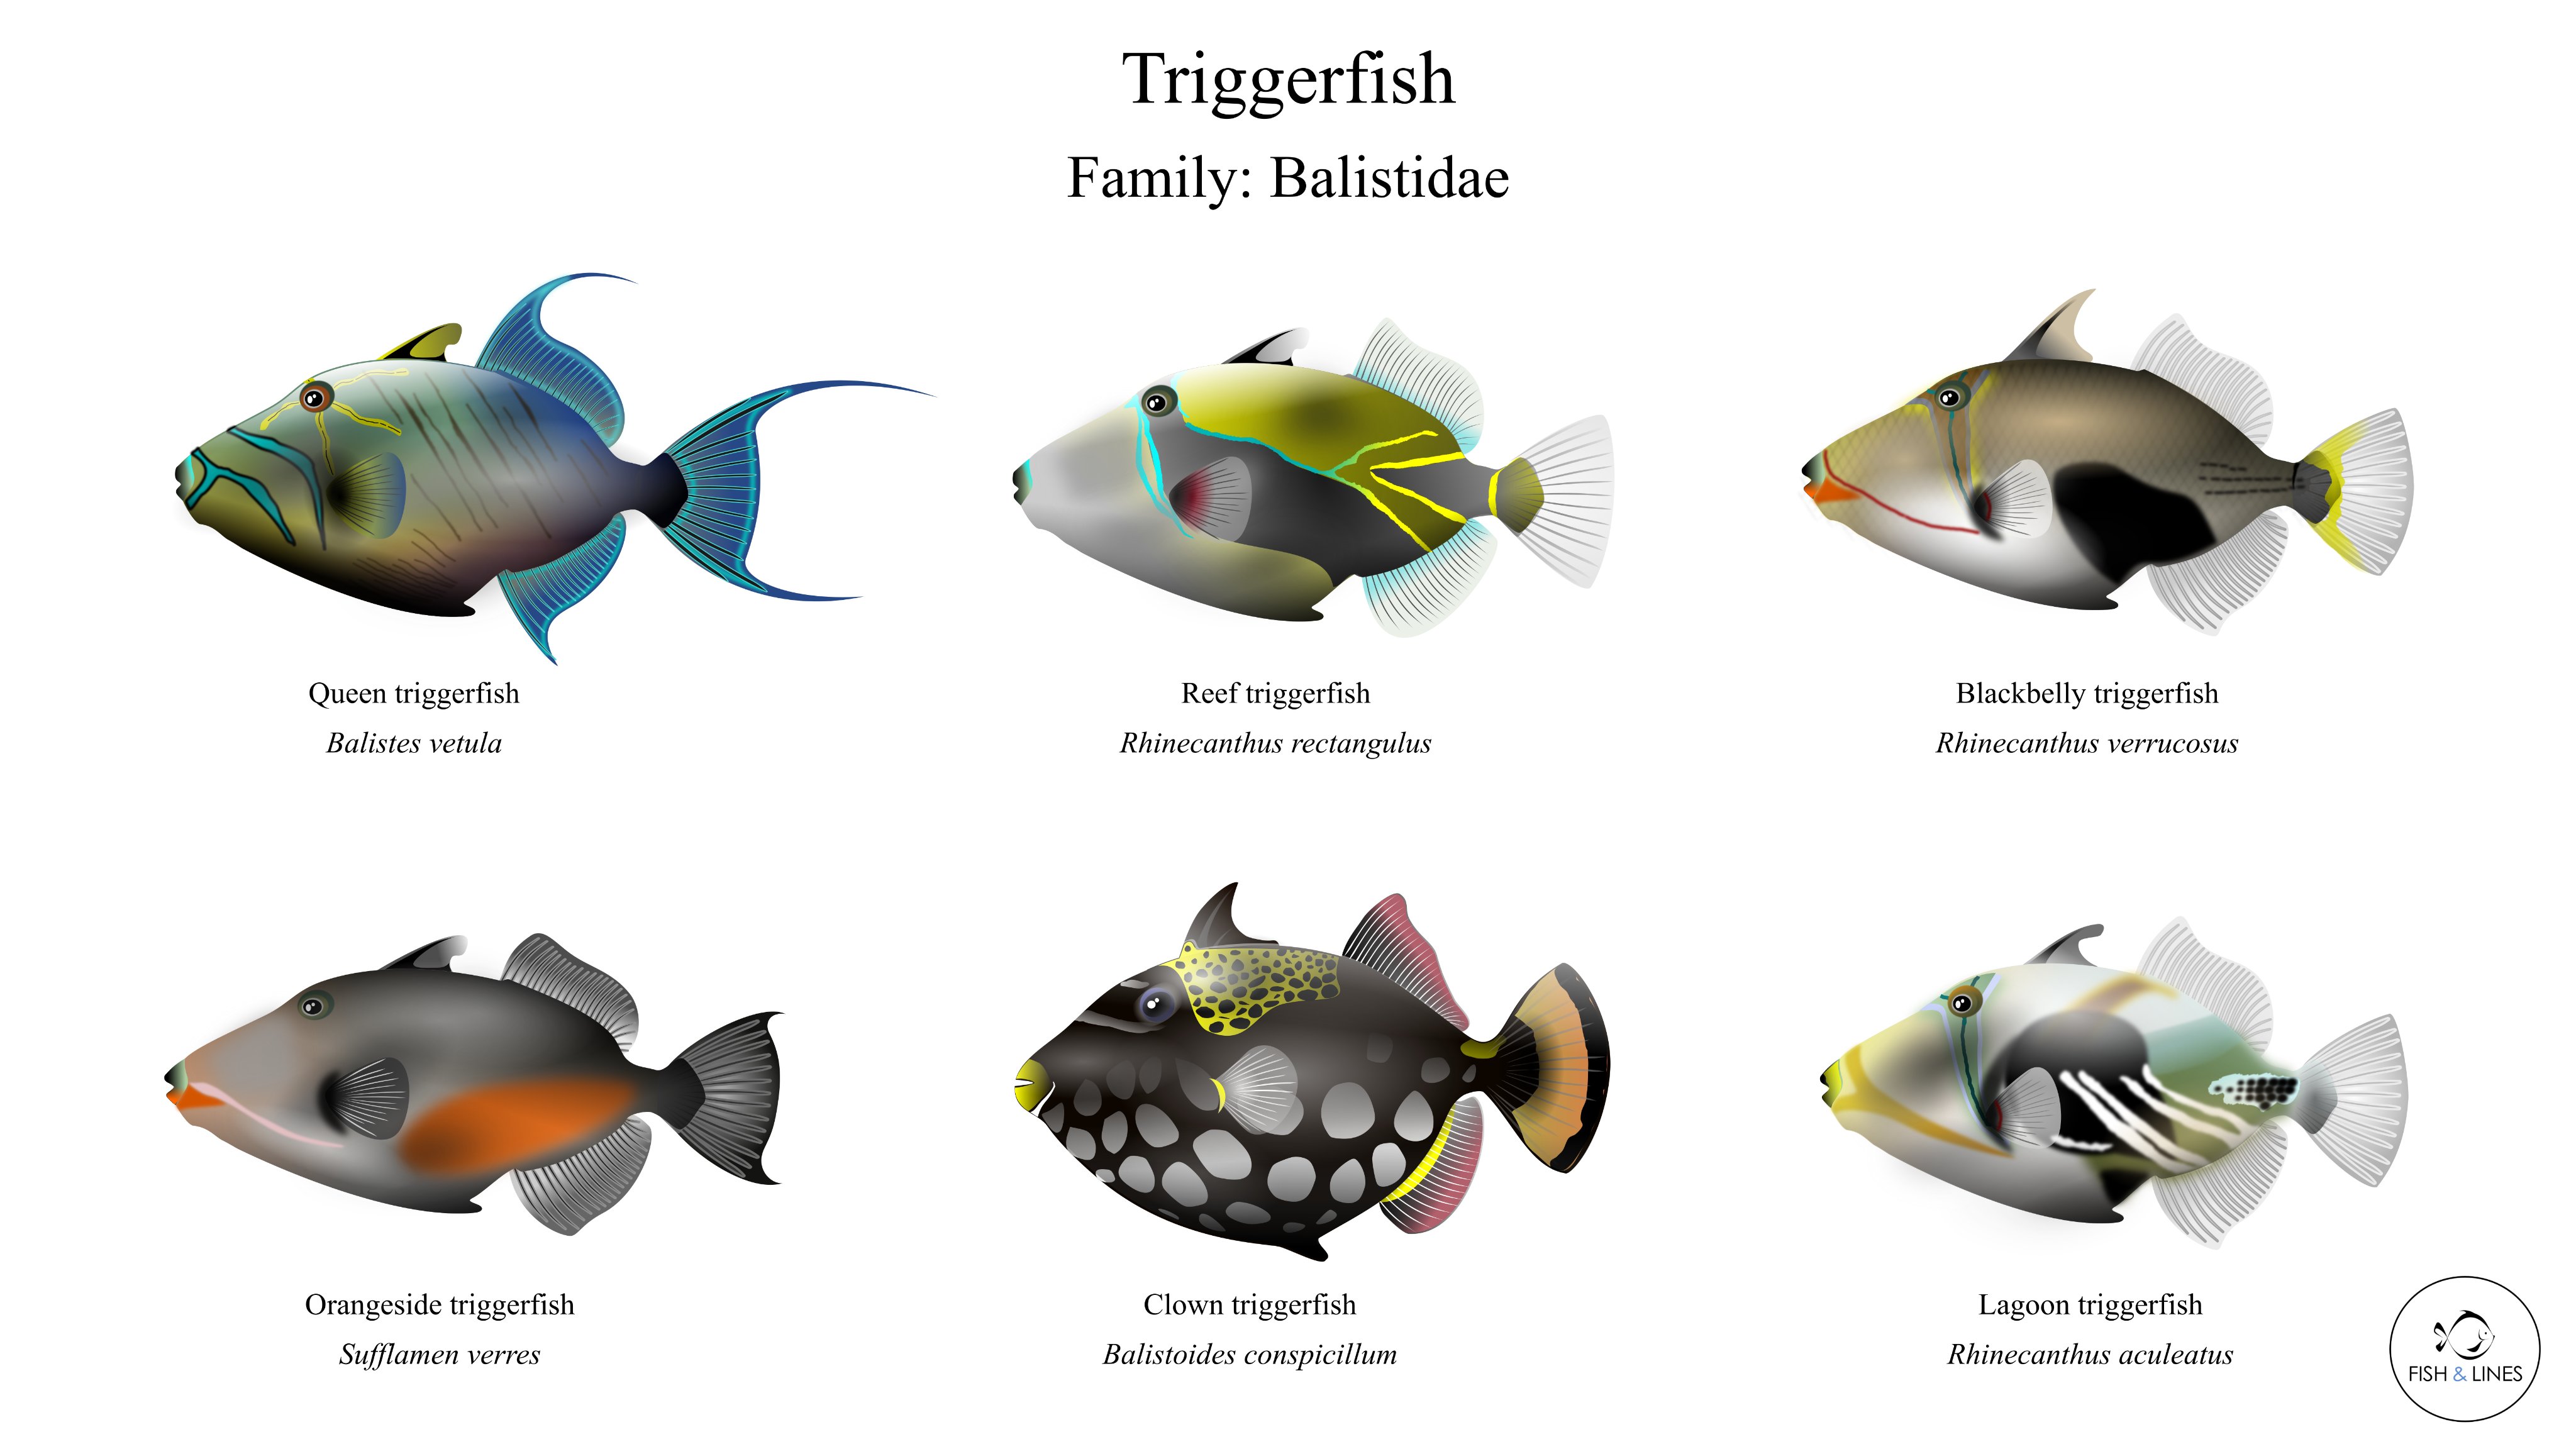 FISH and LINES on X: Here is my illustration of six triggerfish